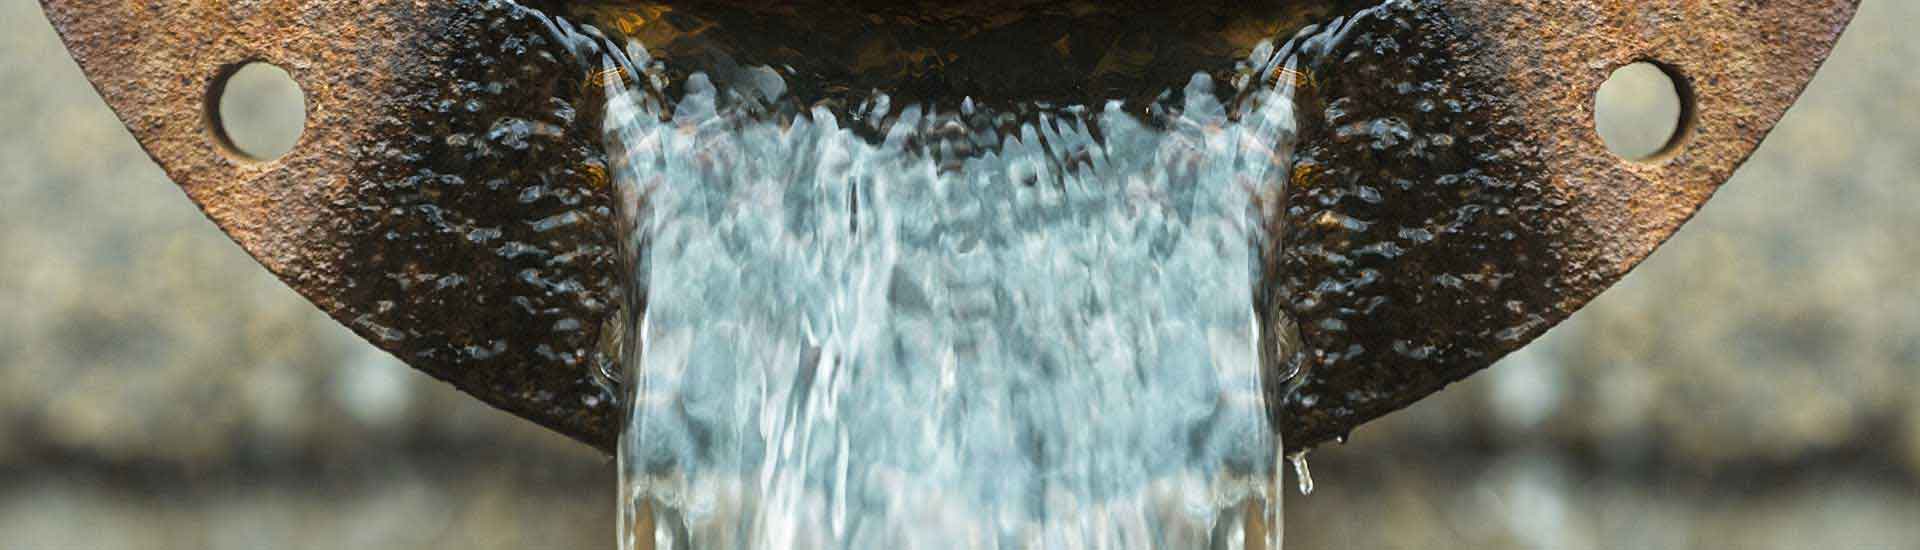 Photo: Image of water flowing out of a metal pipe